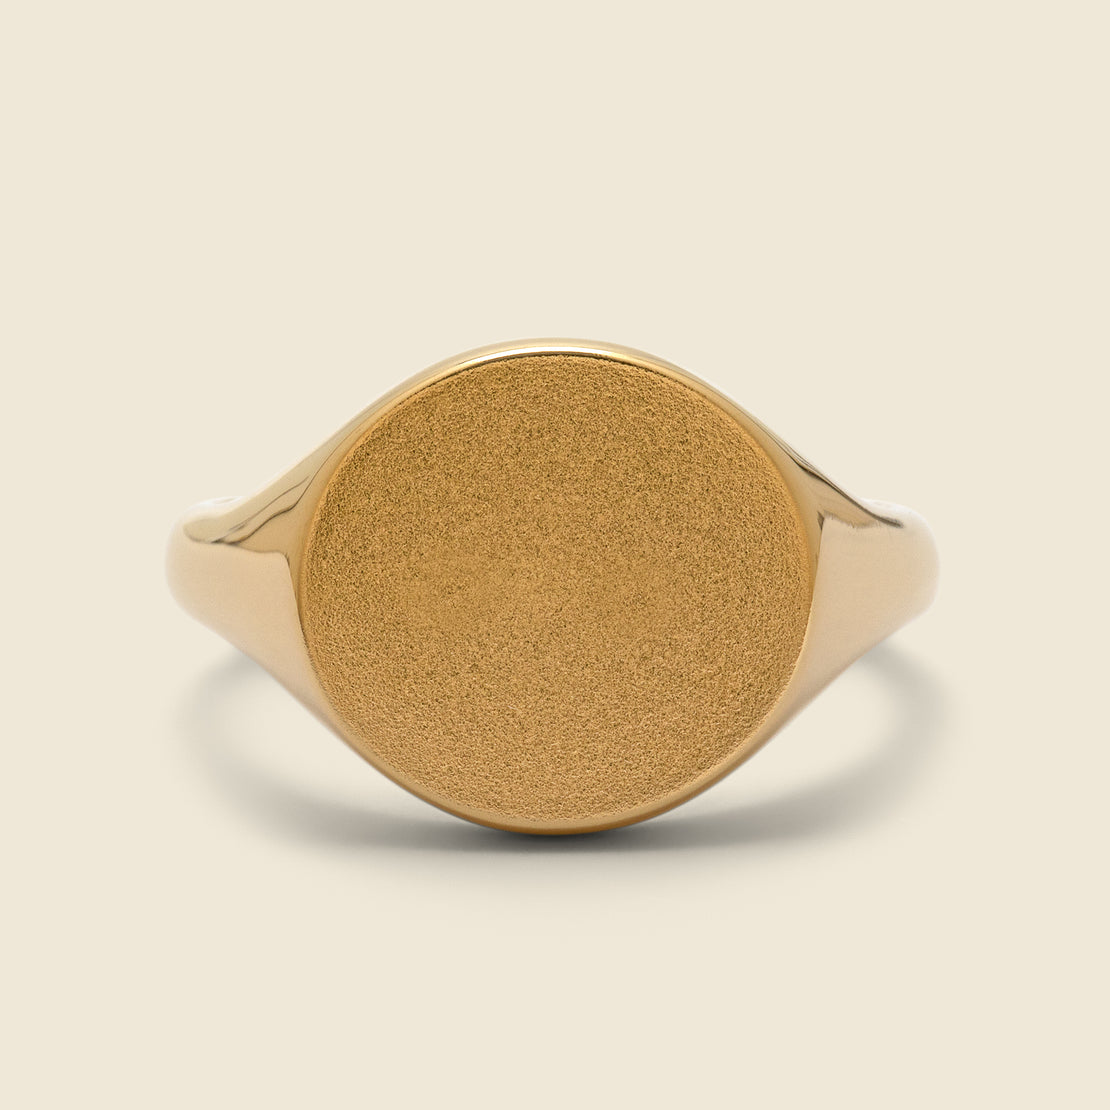 Wells Signet Ring - Gold Vermeil - Miansai - STAG Provisions - Accessories - Rings